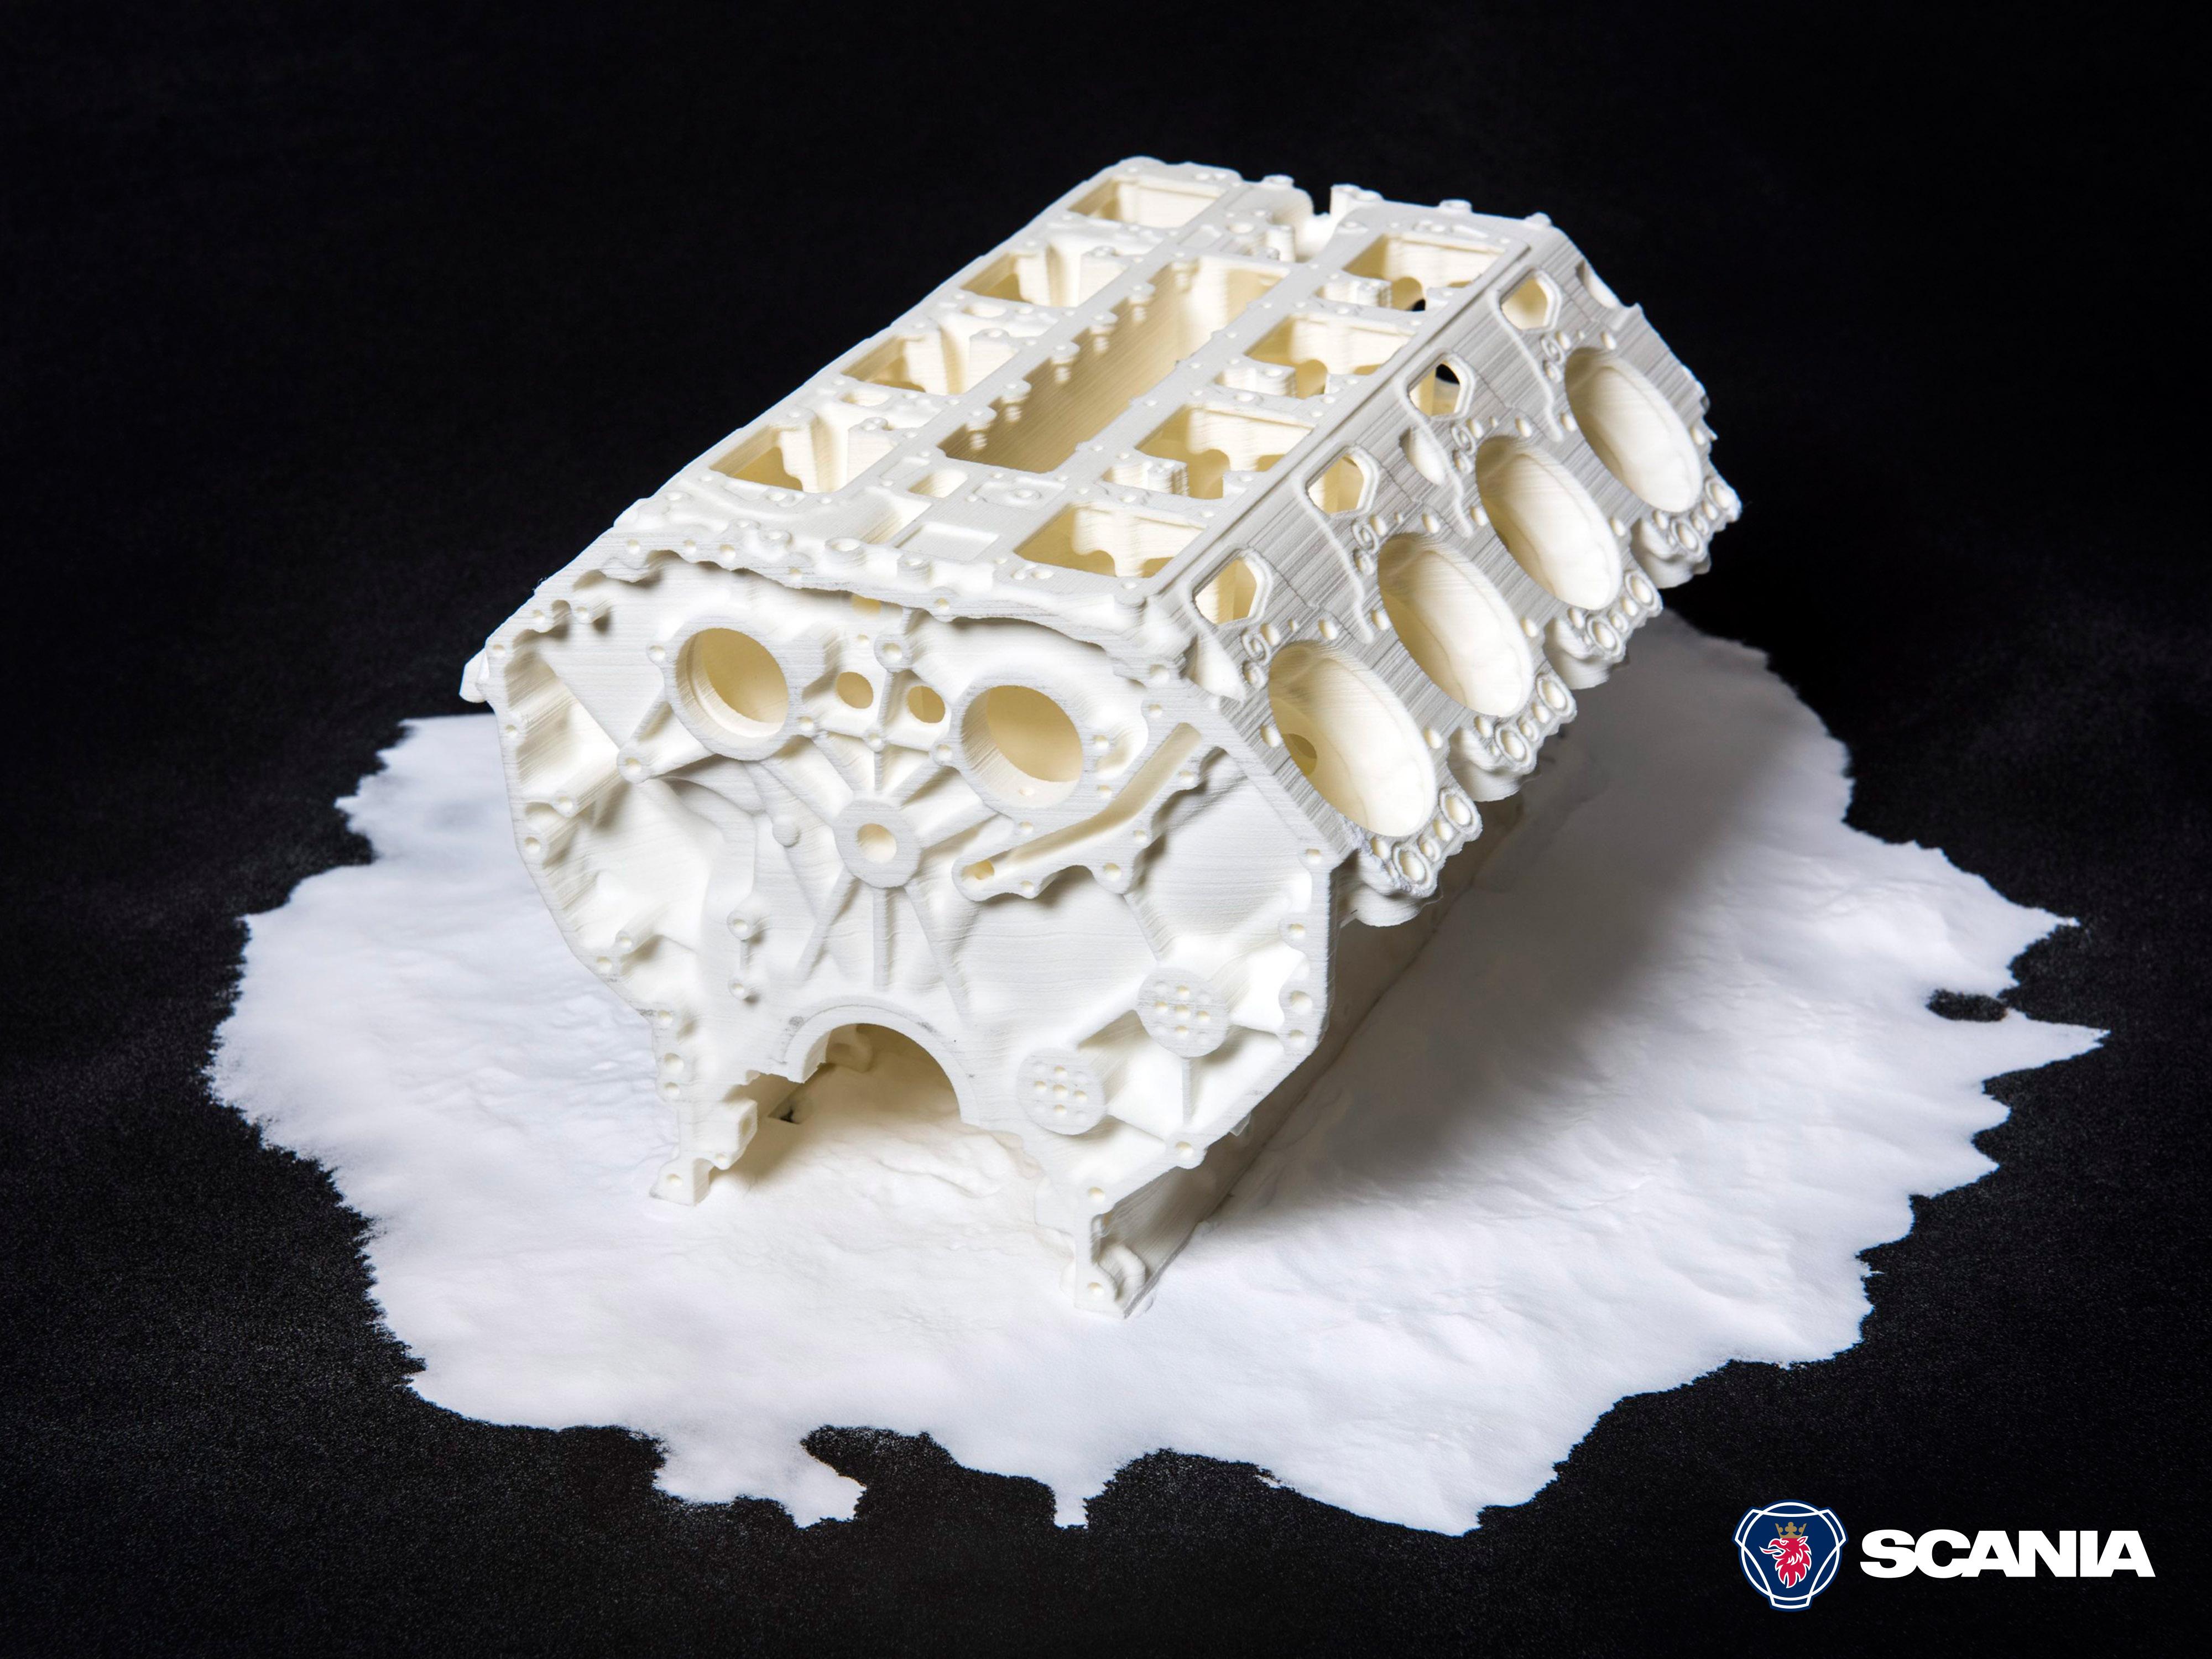 Bezwaar Zus Aap Twitter 上的Scania UK："A 3D print of a V8 engine. Find out how we use 3D  printing to prototype new #Scania designs http://t.co/smOHIMUS7T  http://t.co/VSJSulbChS" / Twitter